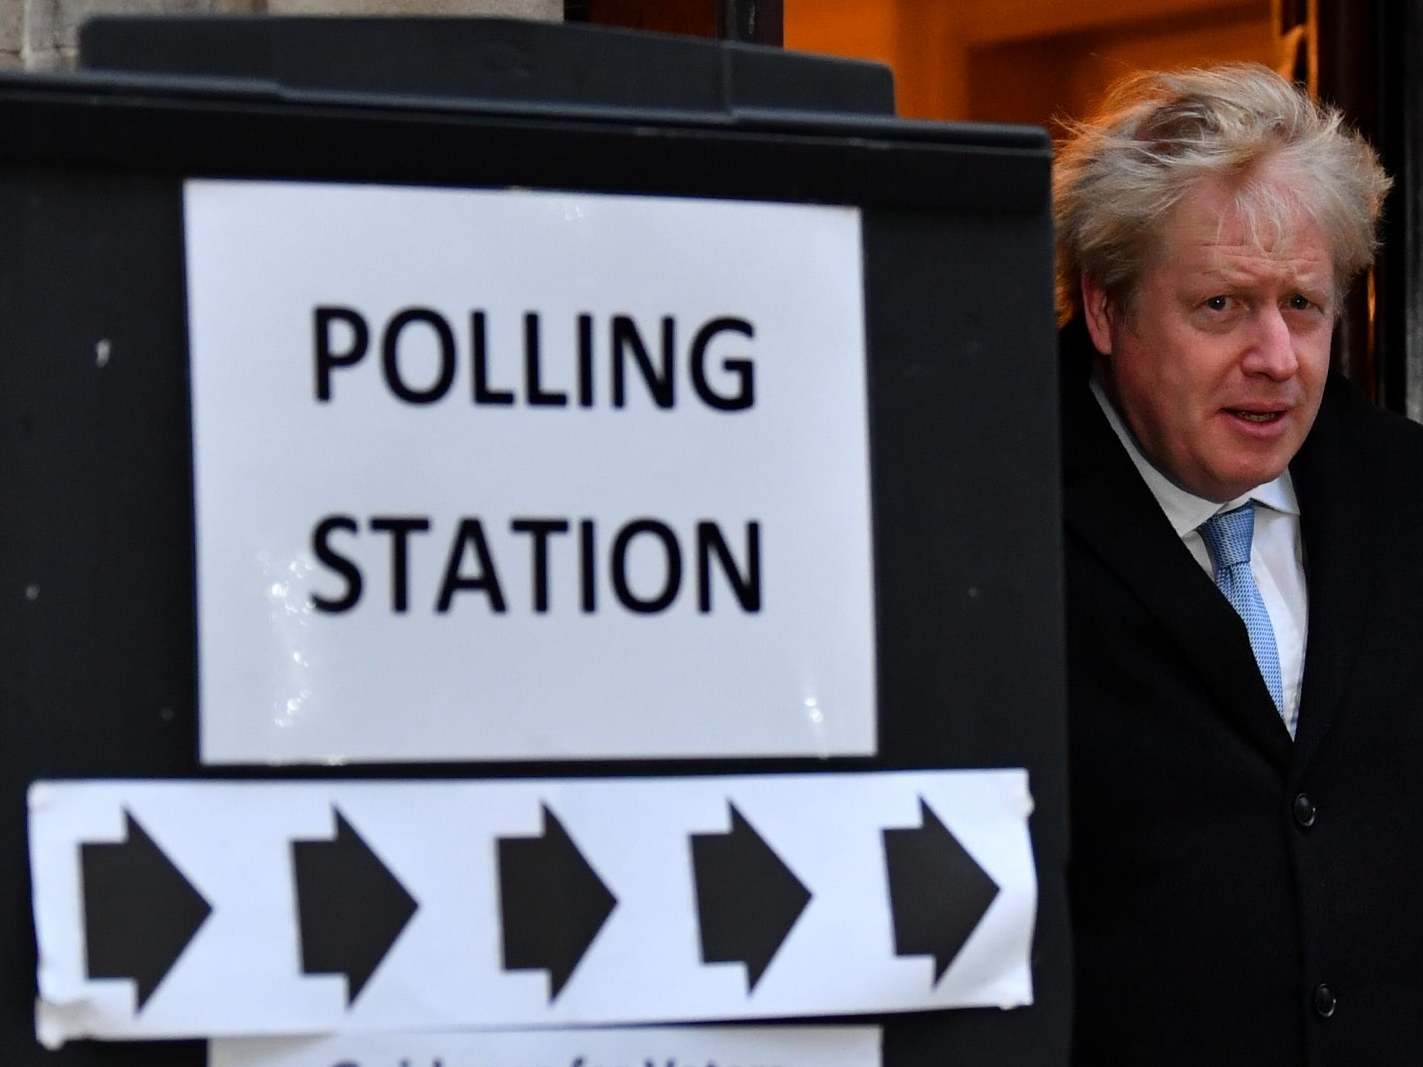 What being a black Tory voter means to me and why I won't be shamed for it